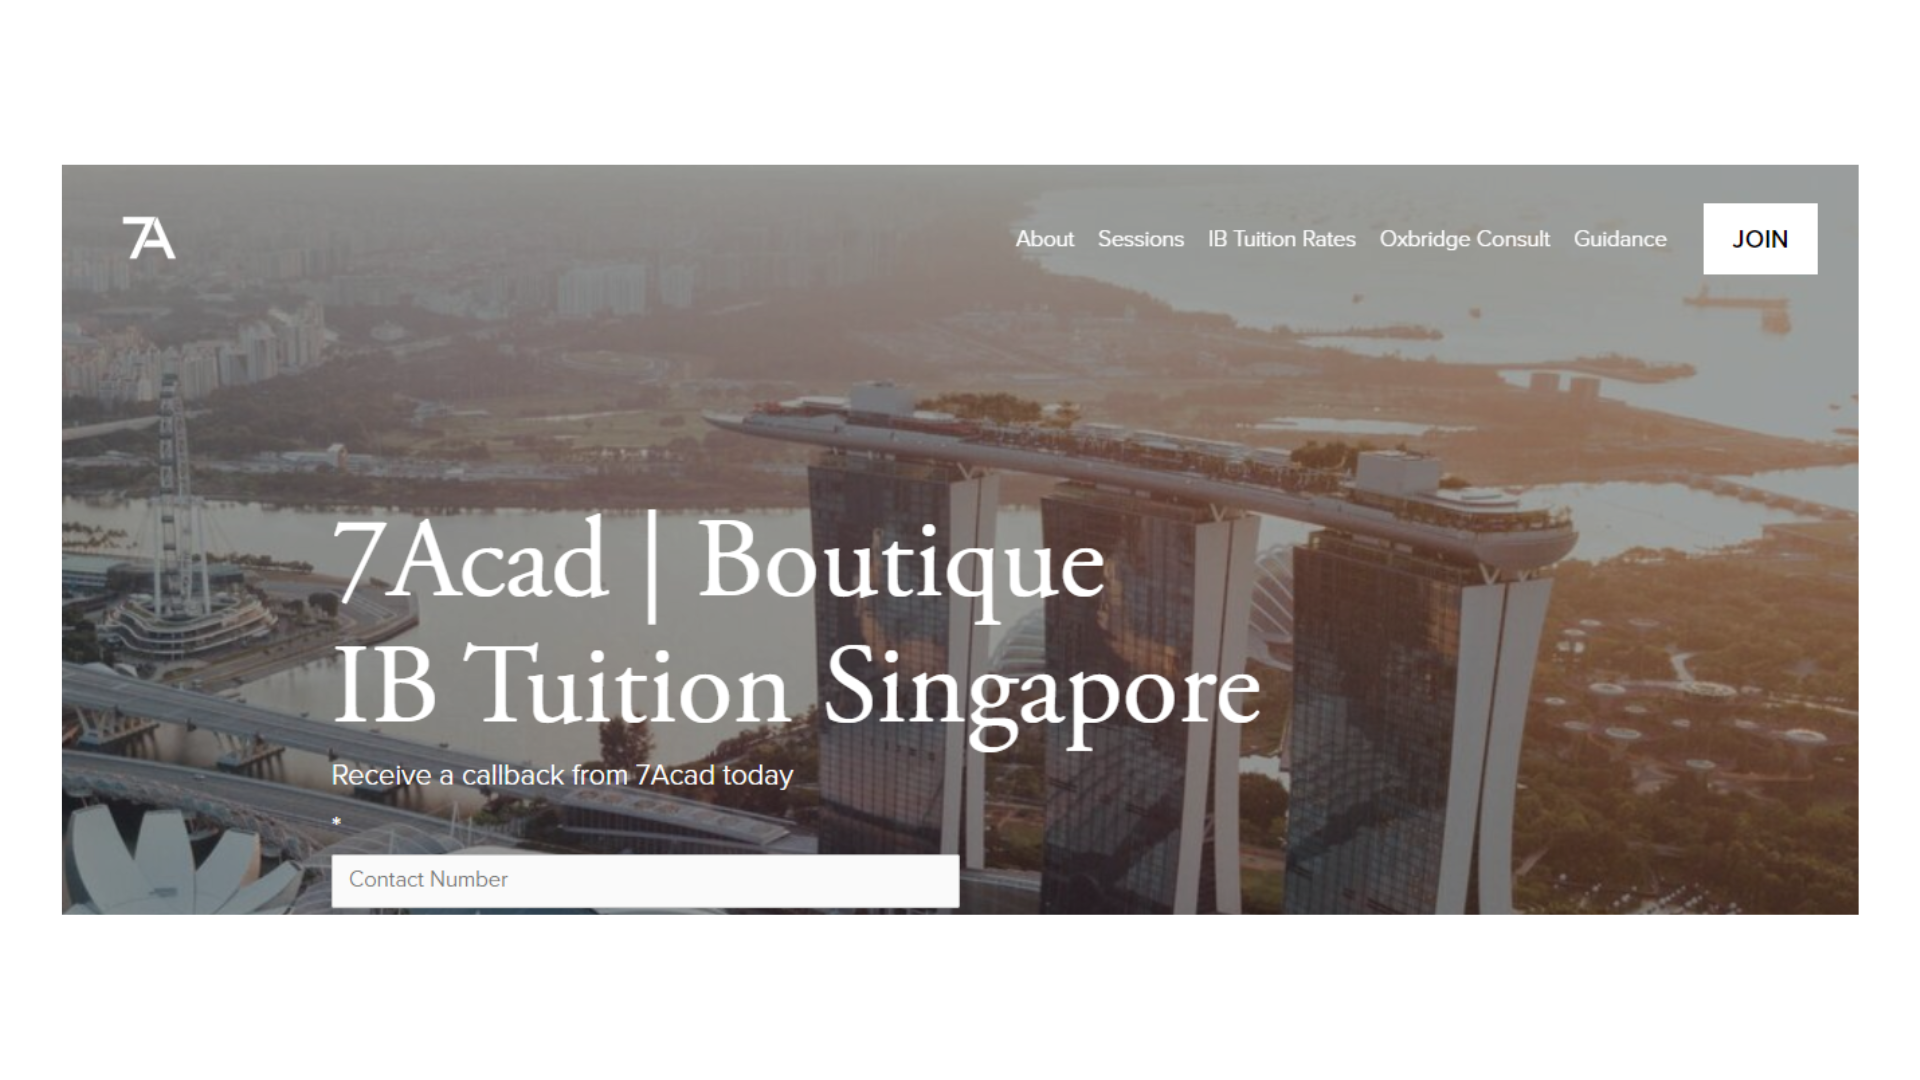 7Acad is a boutique International Baccalaureate (IB) Tuition center in Singapore that provides personalized, interactive, and enjoyable education for students. 